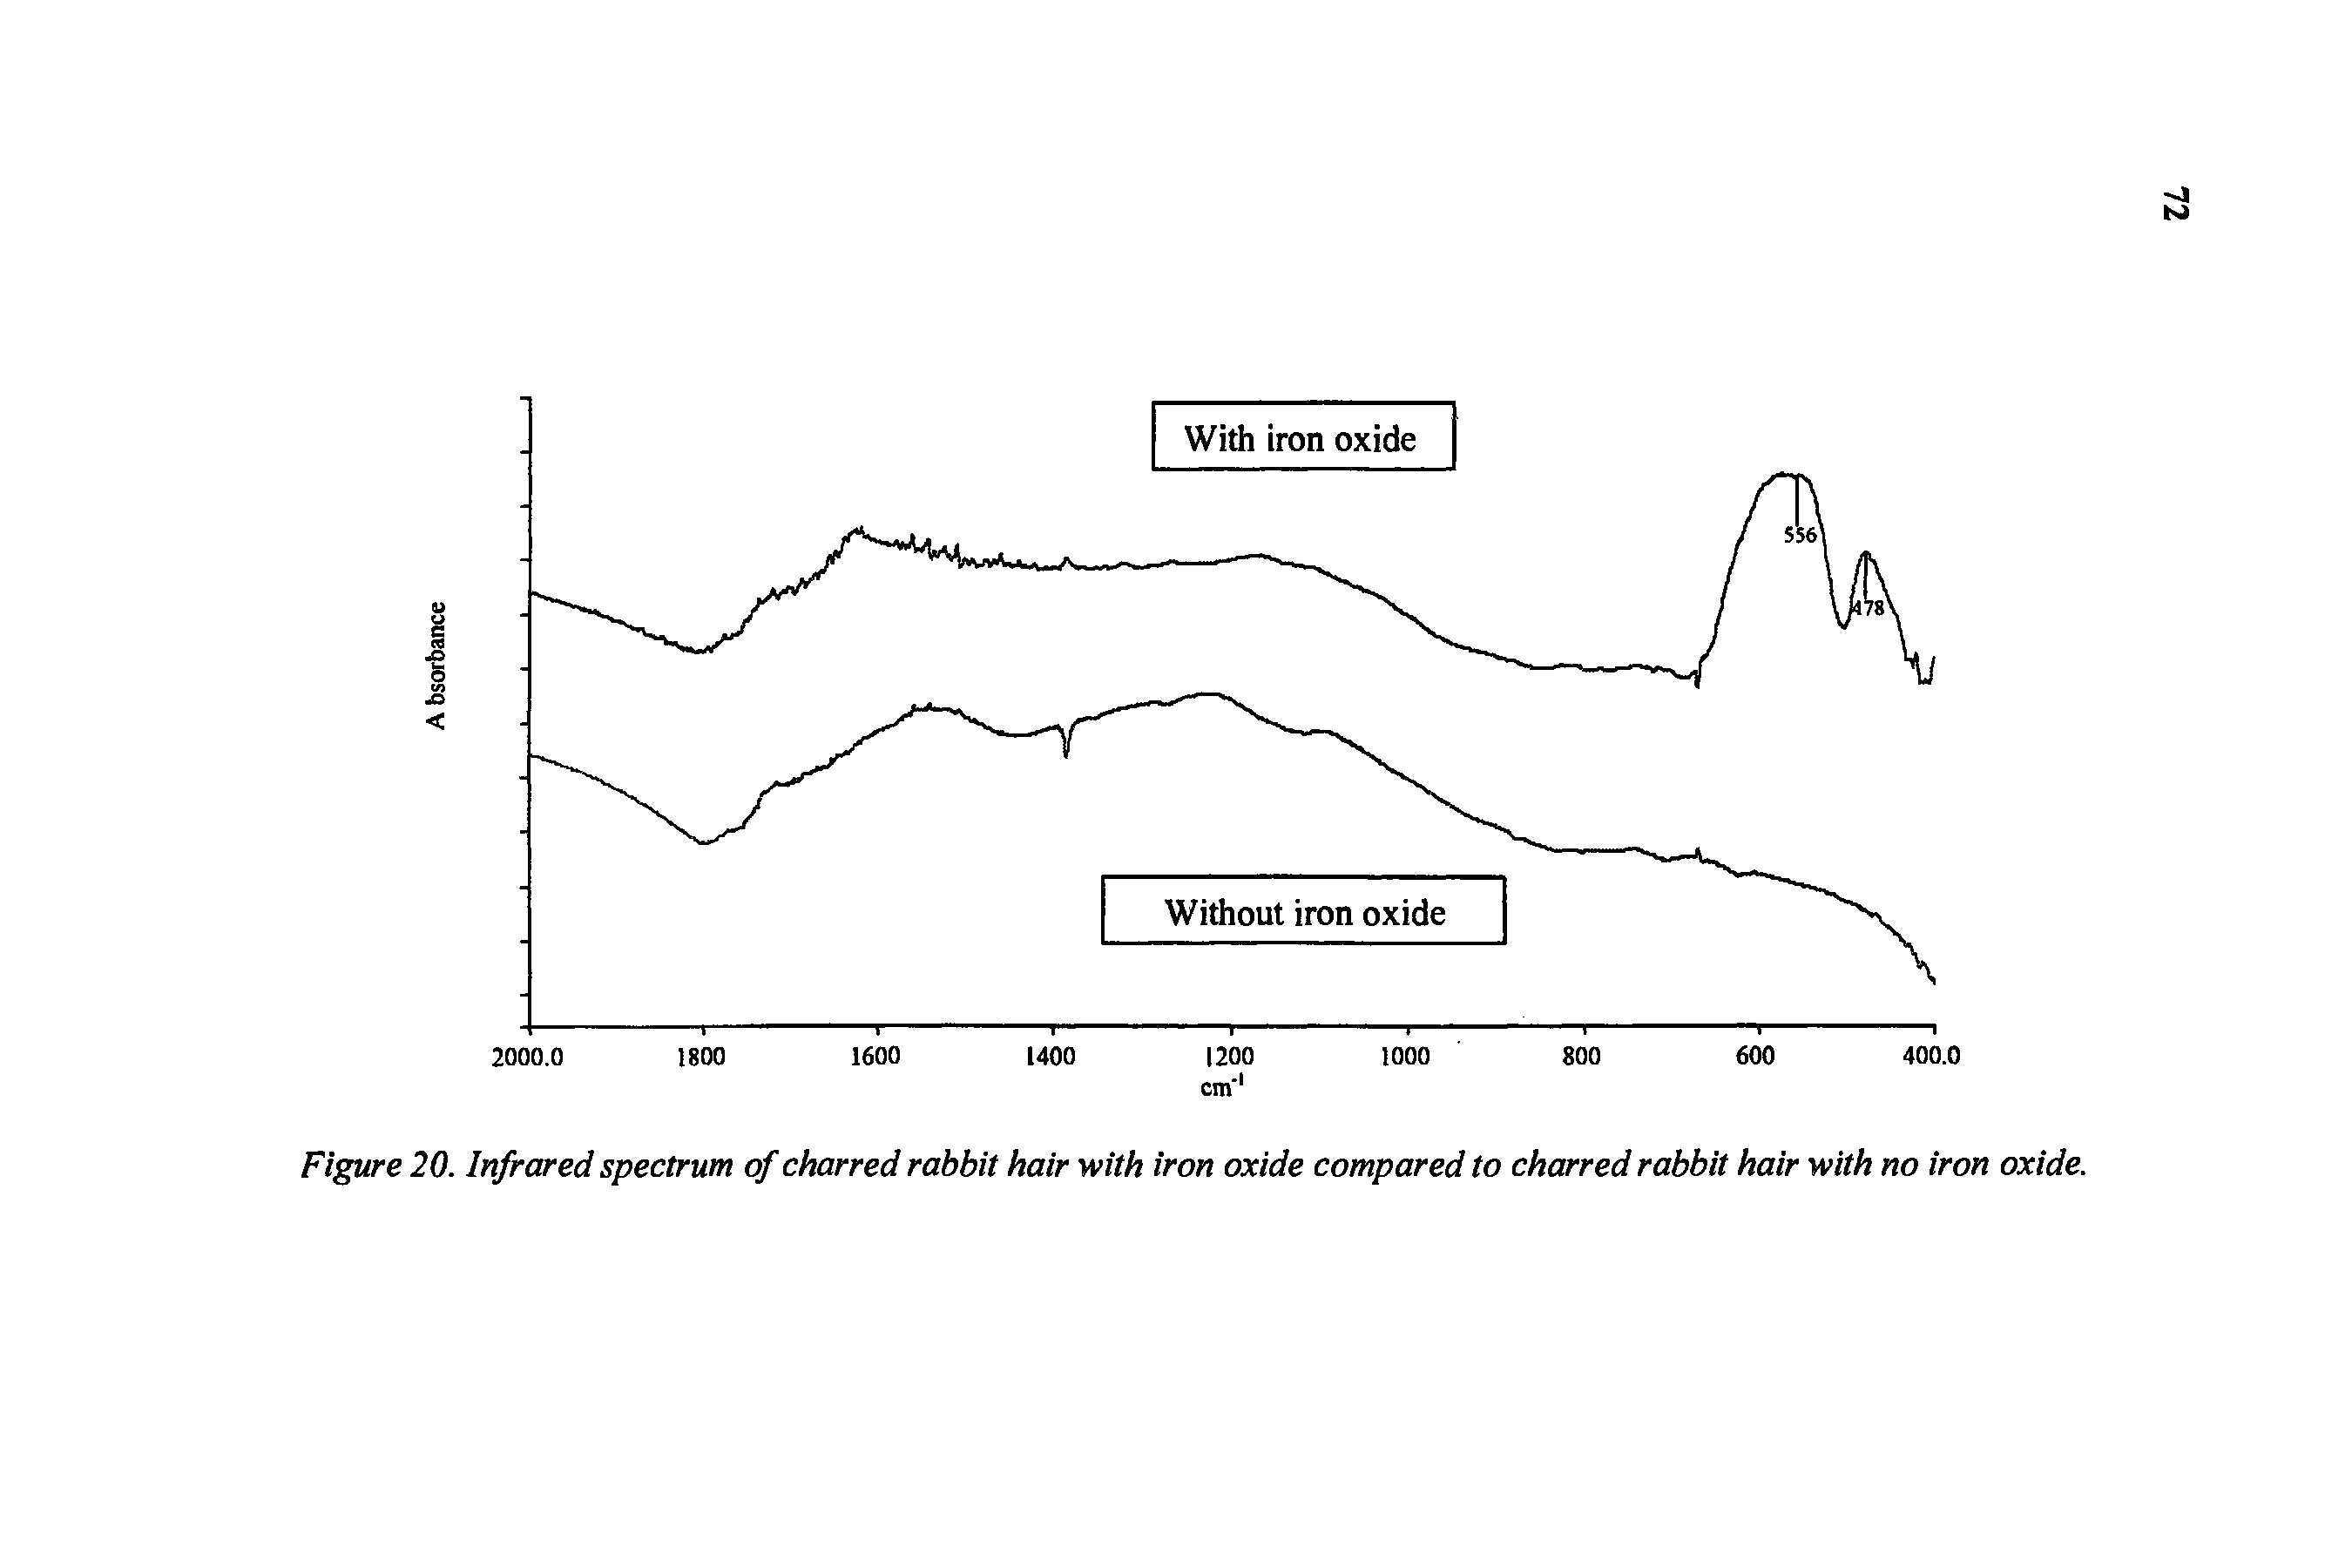 Figure 20. Infrared spectrum of charred rabbit hair with iron oxide compared to charred rabbit hair with no iron oxide.